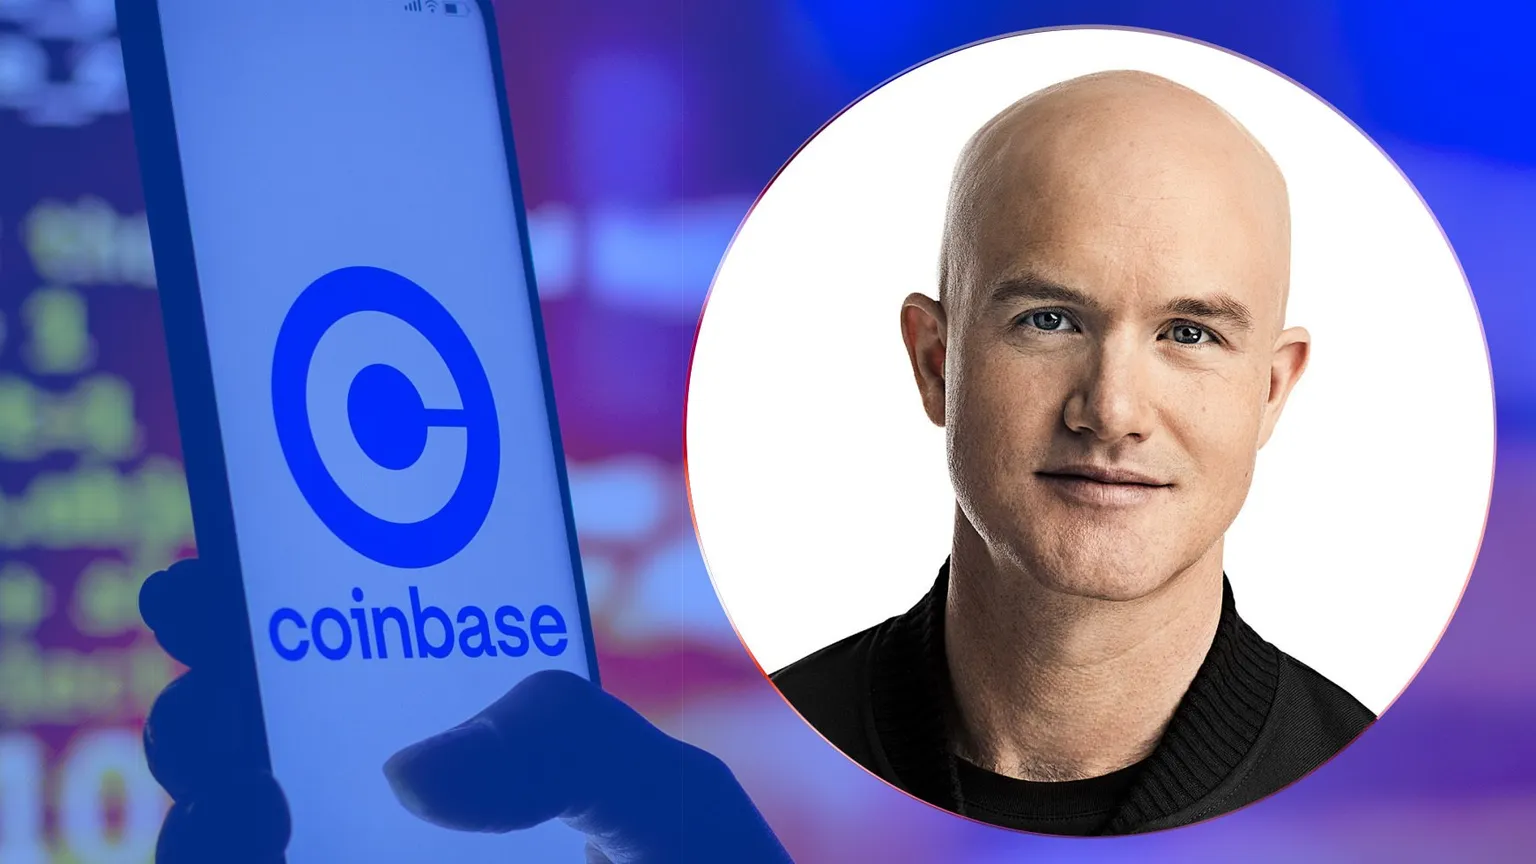 Image: Coinbase/Shutterstock